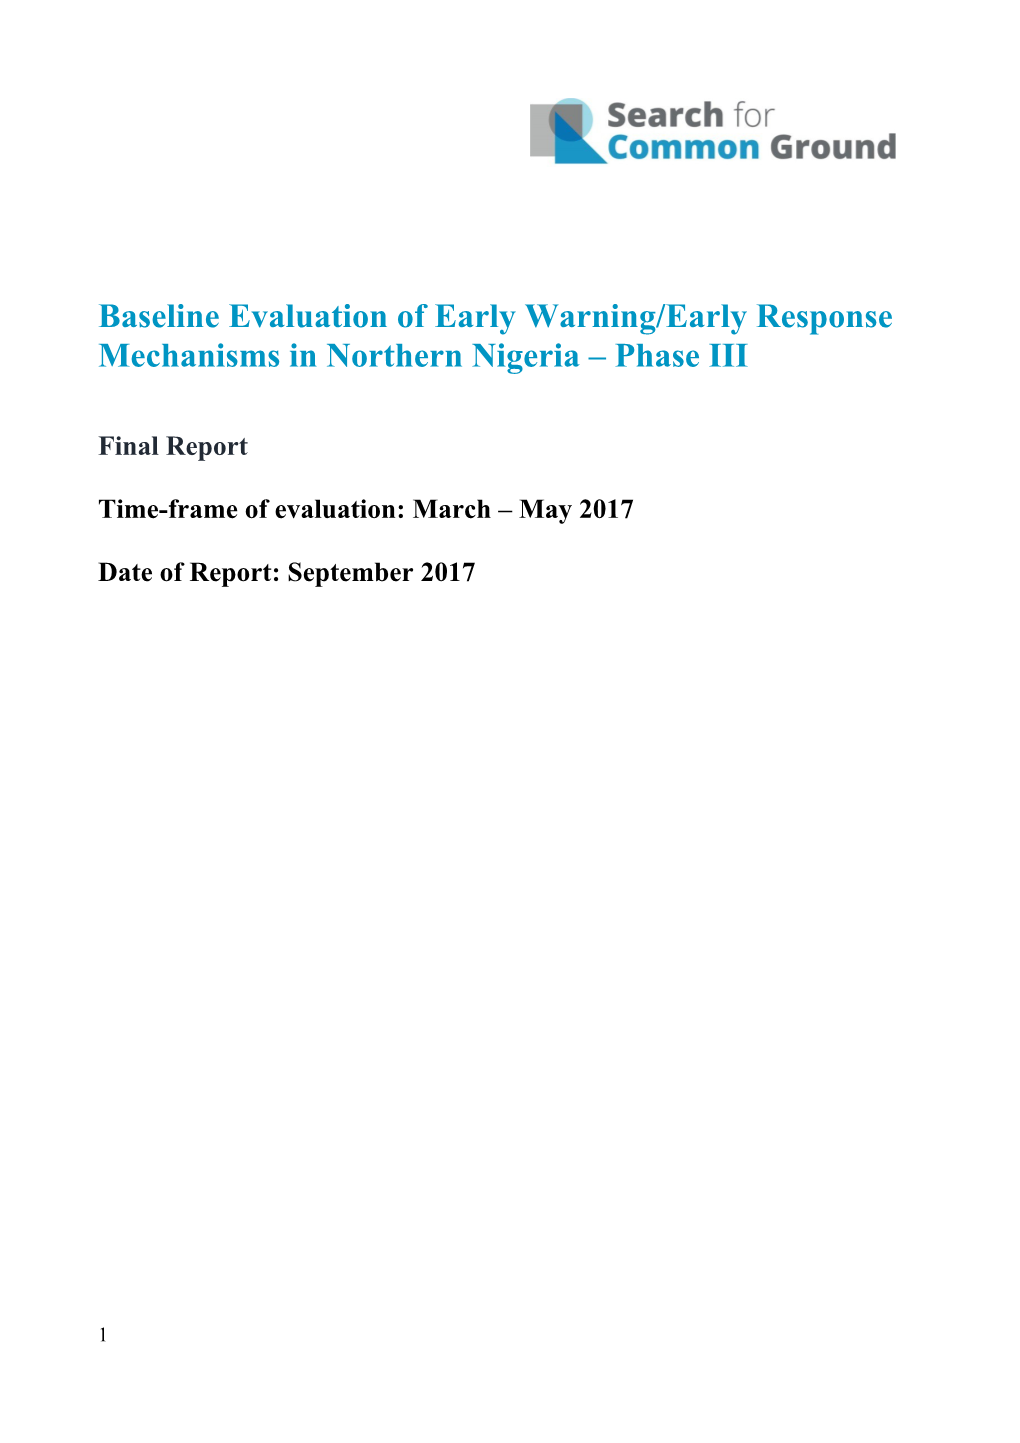 Baseline Evaluation of Early Warning/Early Response Mechanisms in Northern Nigeria Phase III